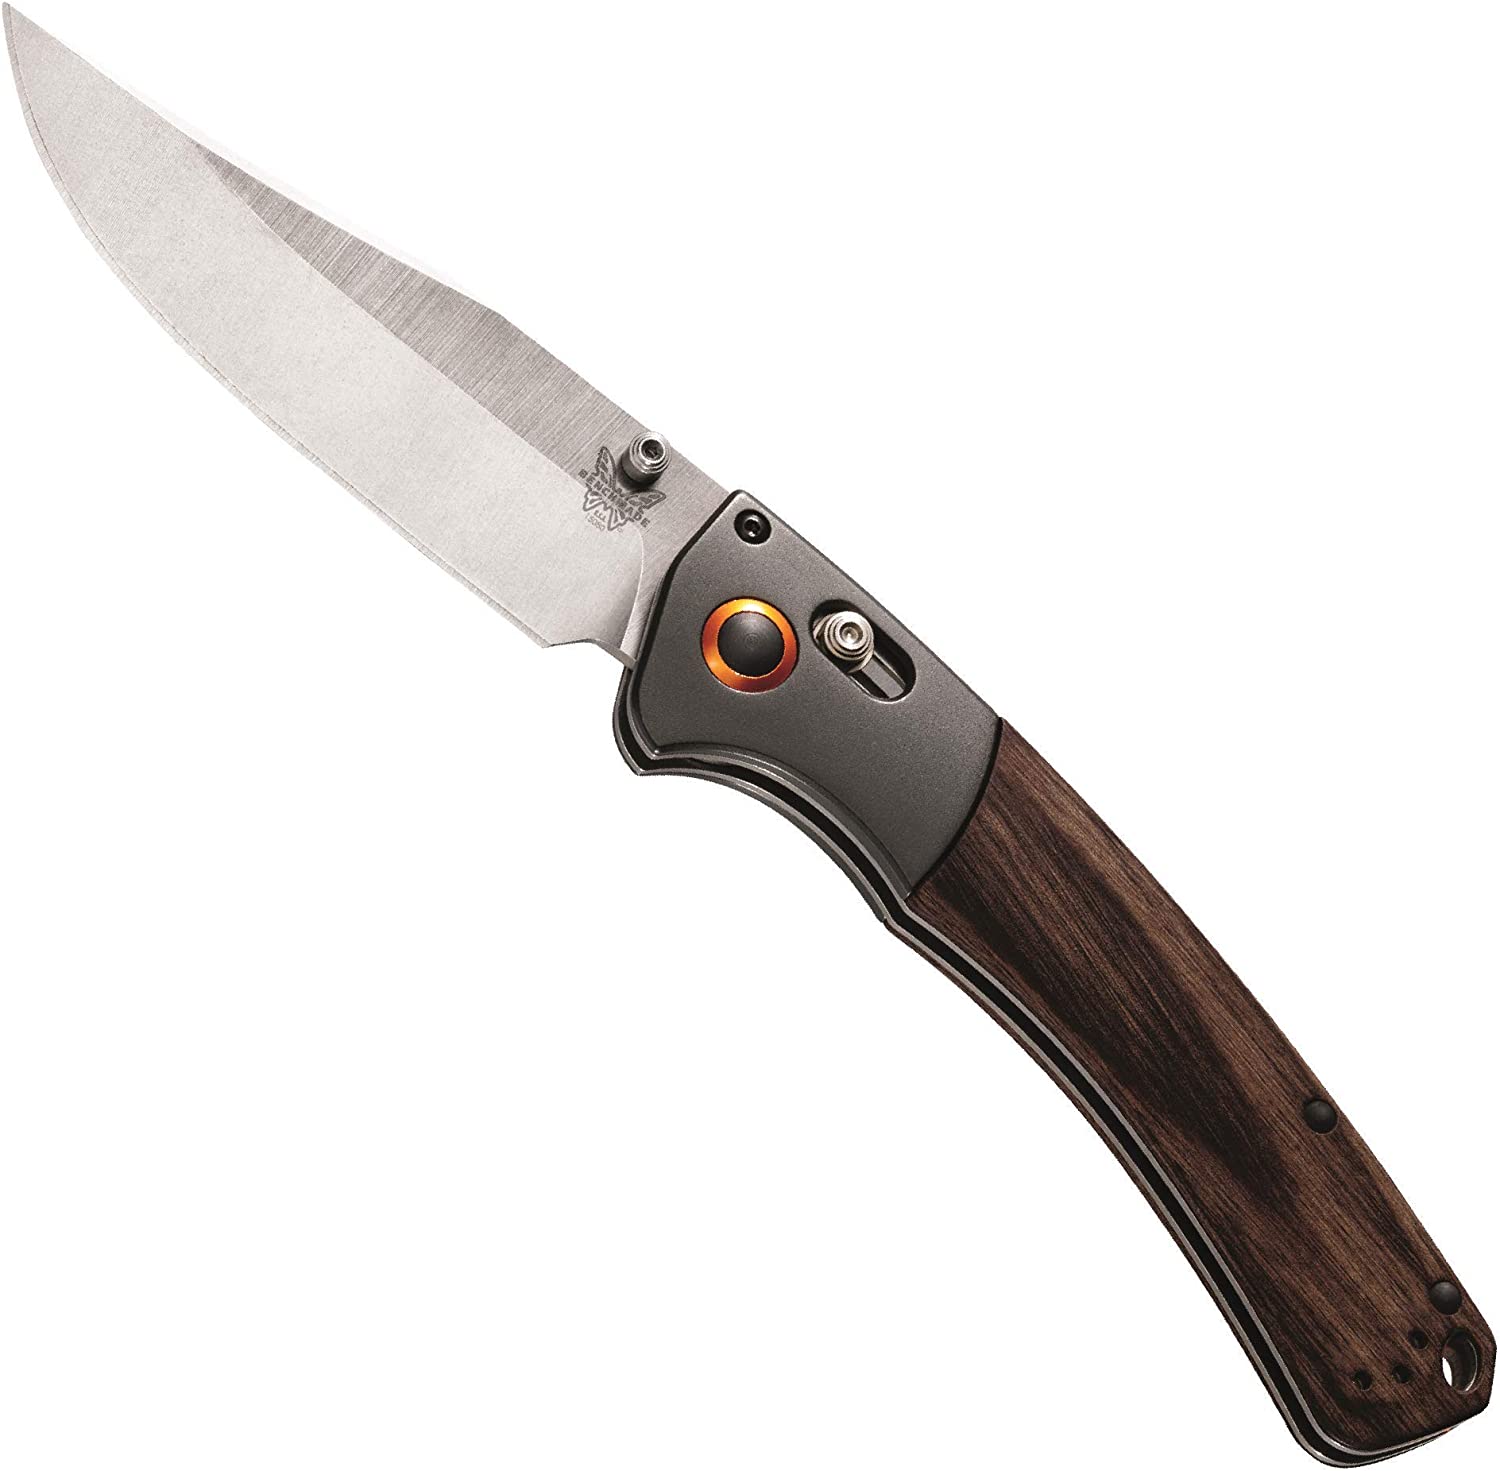 Benchmade – Mini Crooked River 15085-2 EDC Manual Open Hunting Knife Made in USA, Clip-Point Blade, Plain Edge, Satin Finish, Wood Handle, Dark Brown